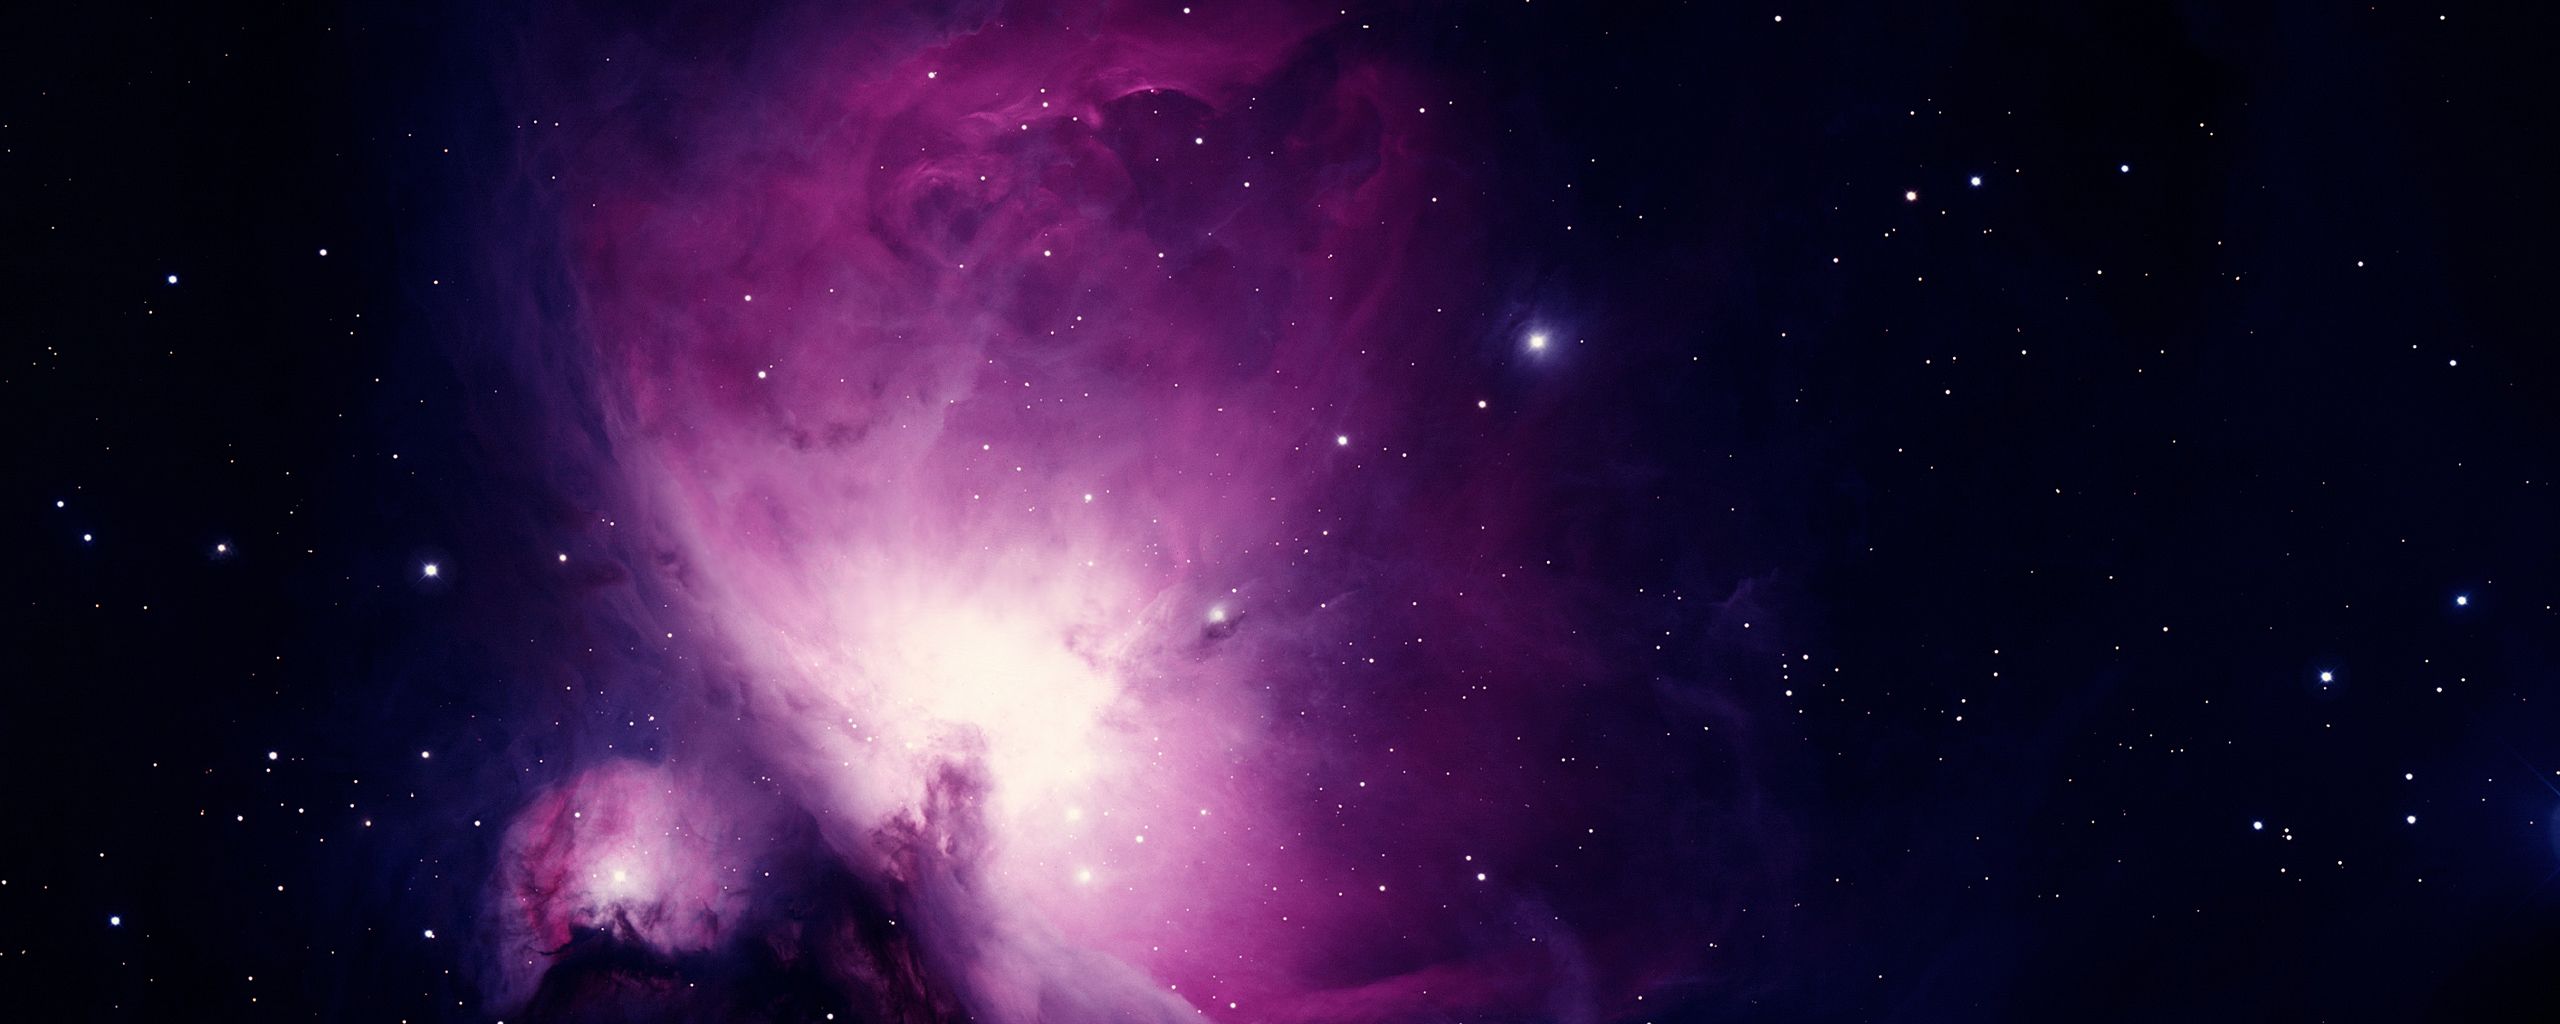 Nebula wallpaper. So, this is what I'm thinking